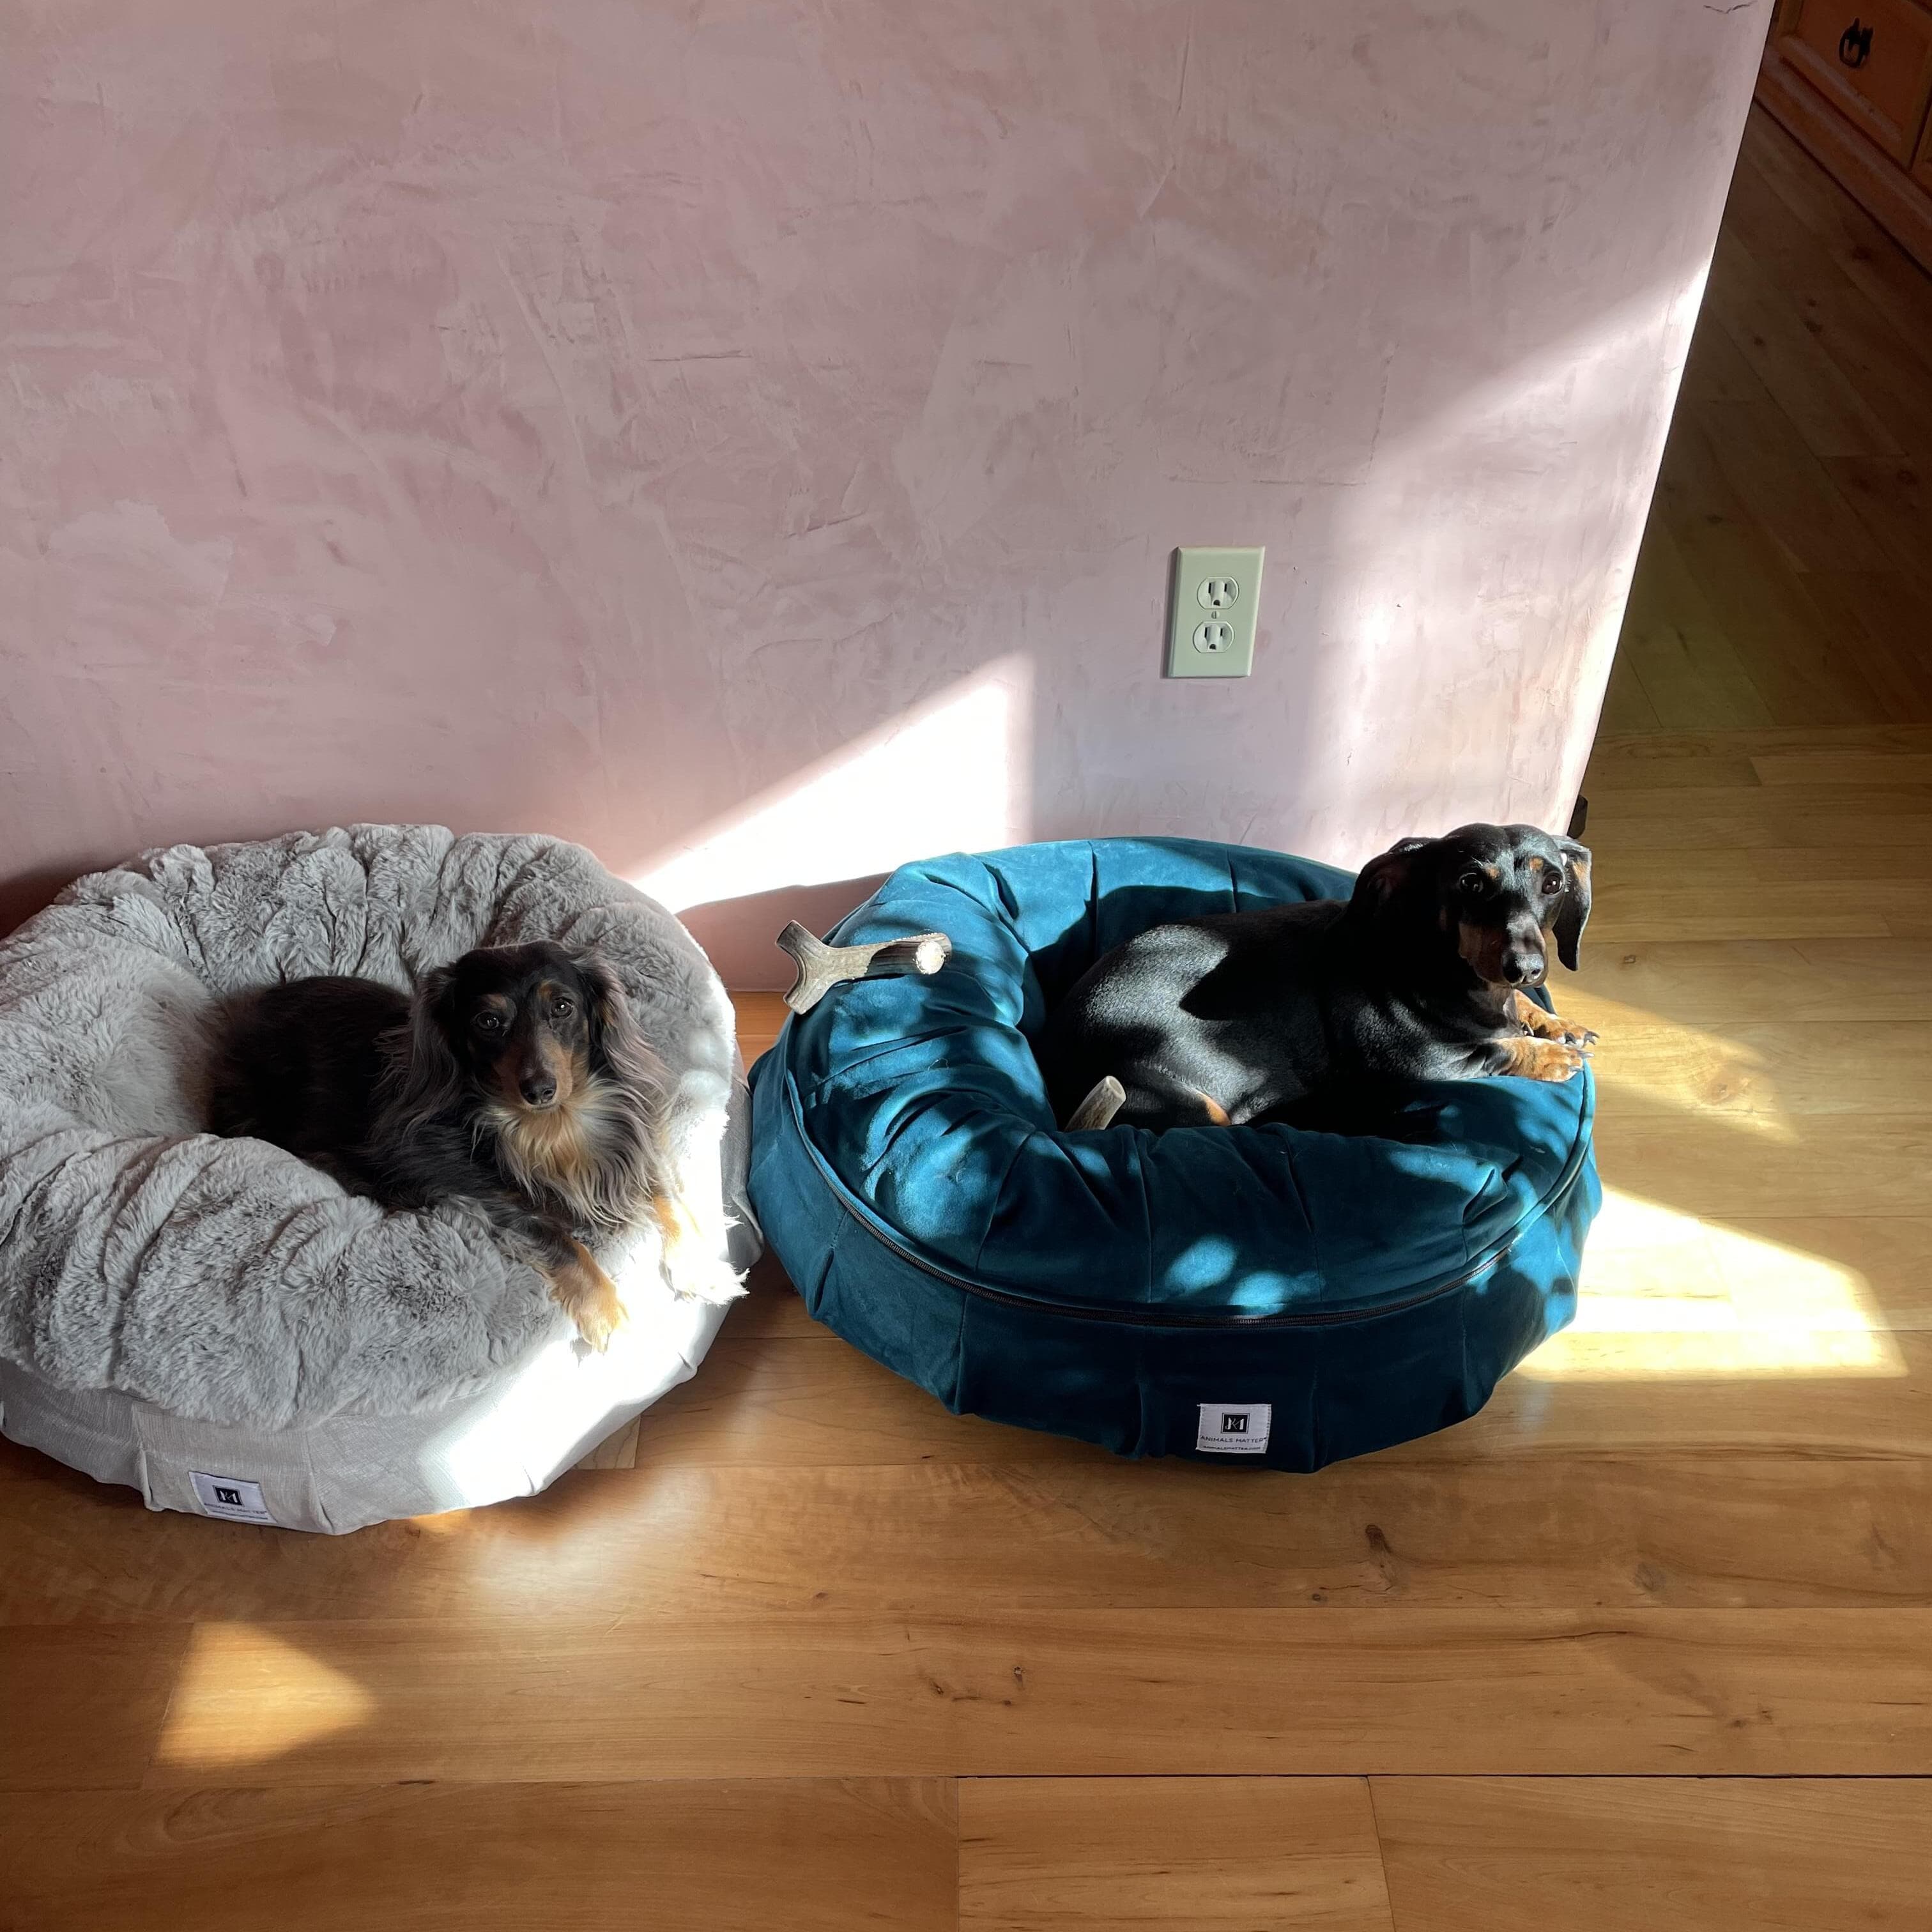 Wanted: Well Trained Overnight Care for 2 sweet dachshunds